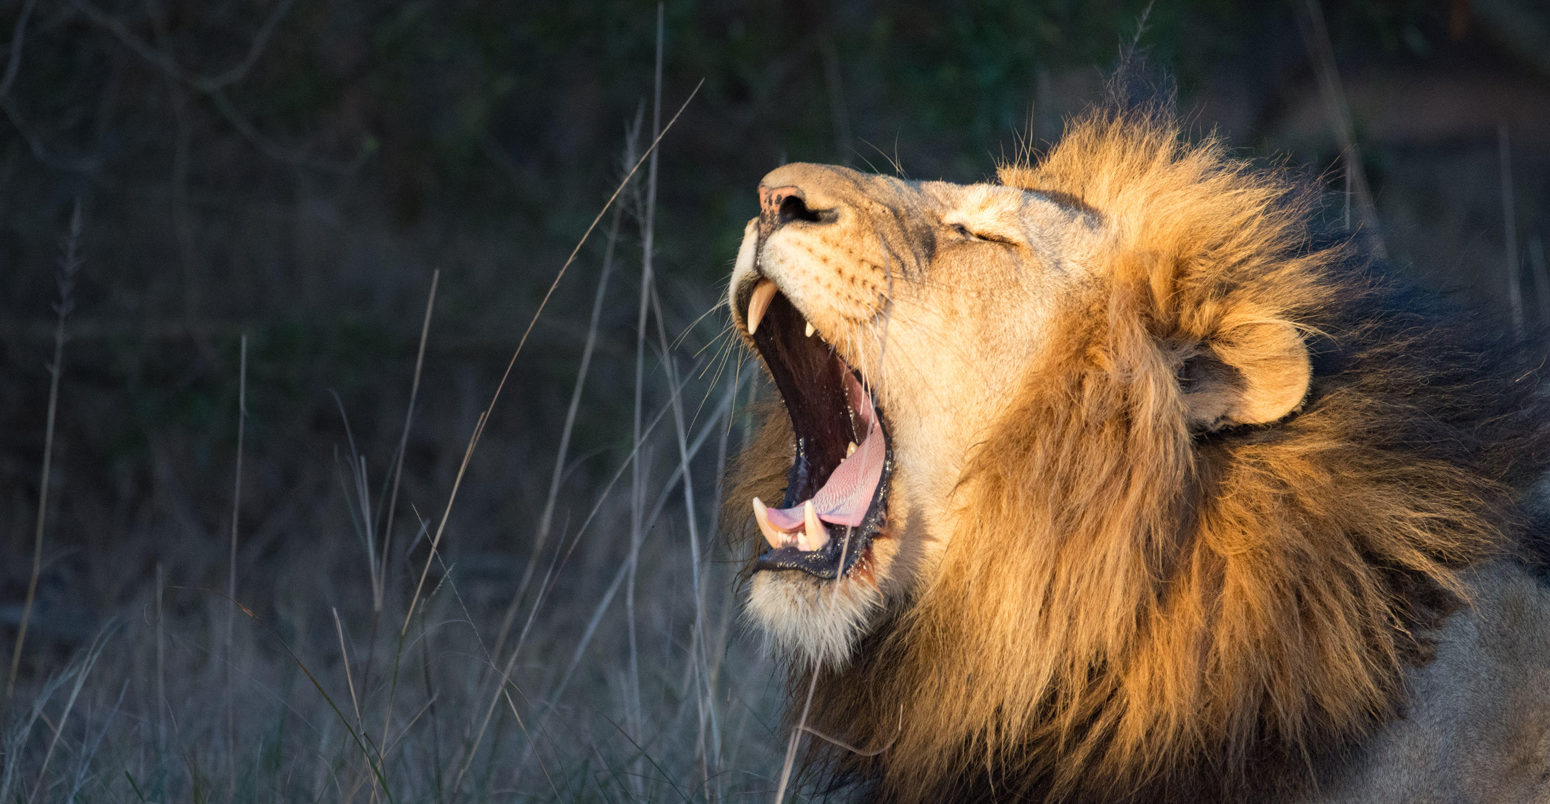 Lion yawning, Grahamstown, Eastern Cape, South Africa. Credit: Richard Smith / Alamy Stock Photo